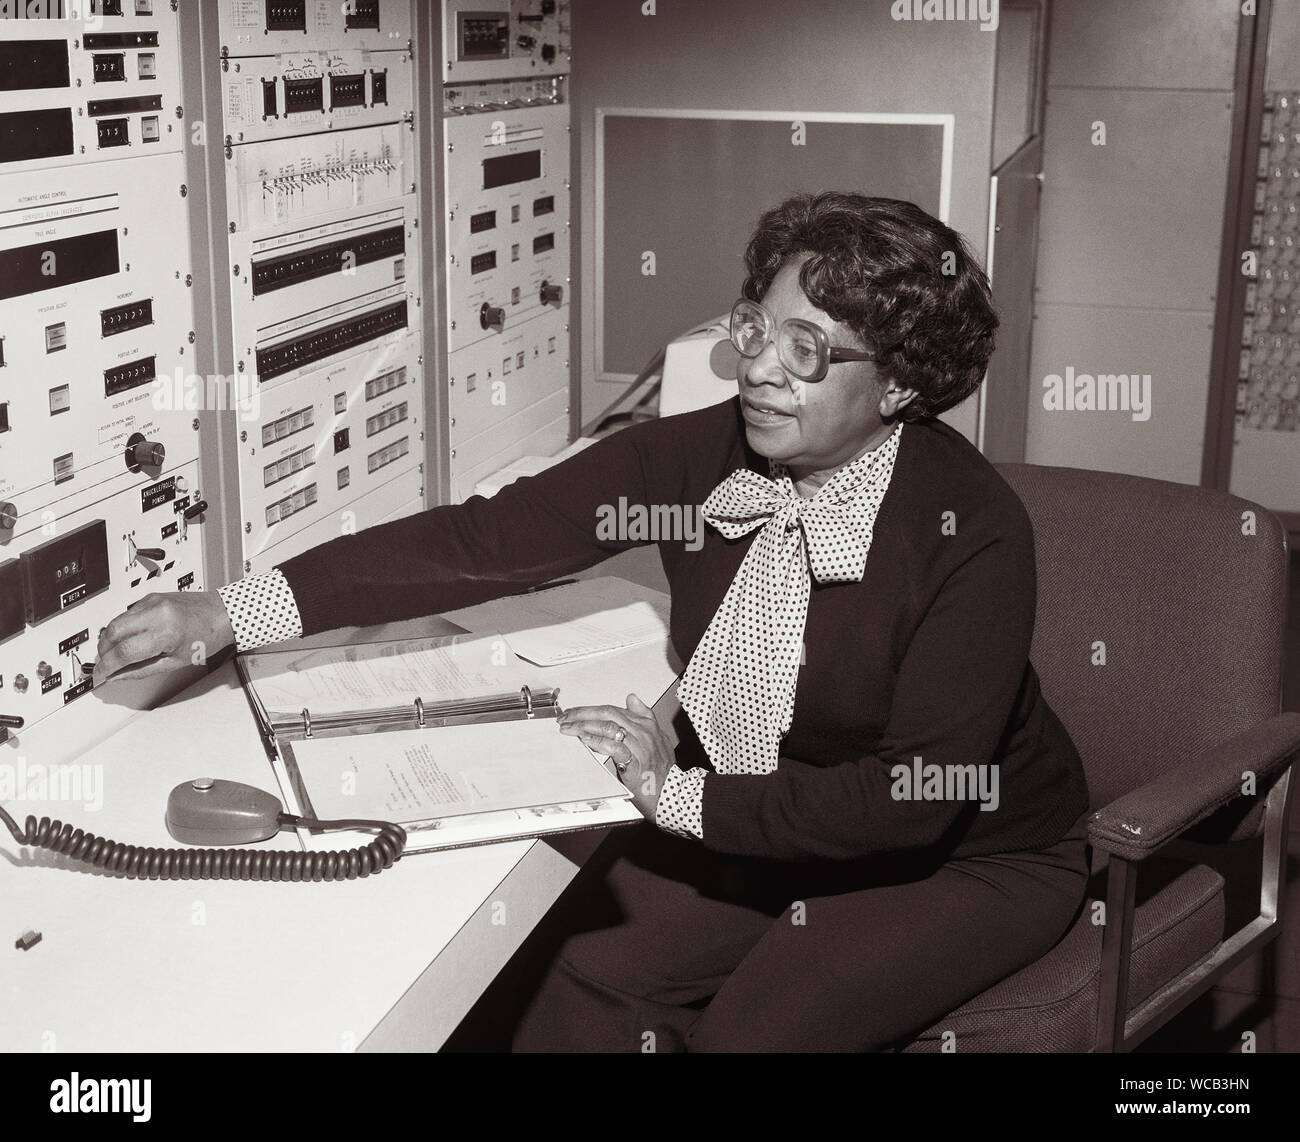 Mary Jackson, a 'human computer' featured in the film Hidden Figures, working at NASA Langley Research Center in Hampton, Virginia. (USA) Stock Photo